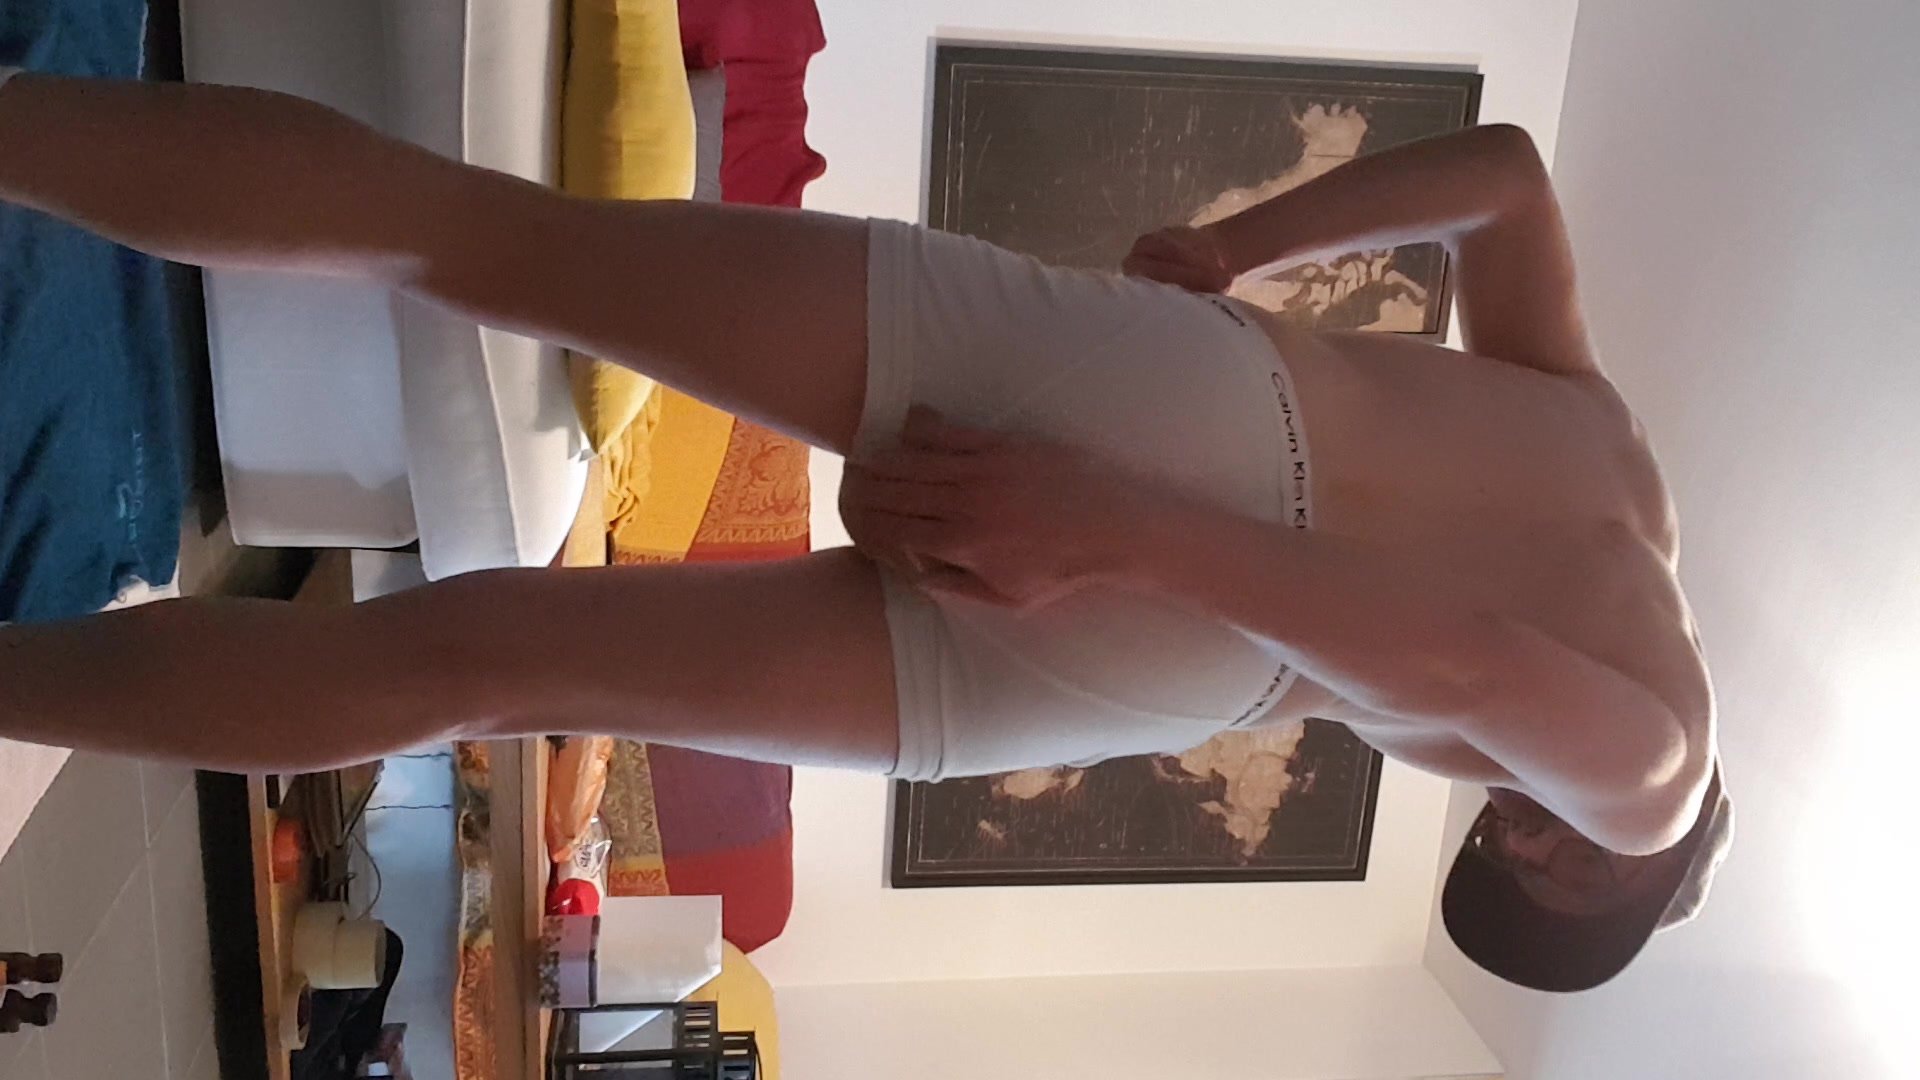 Quick shit in my white CK boxer